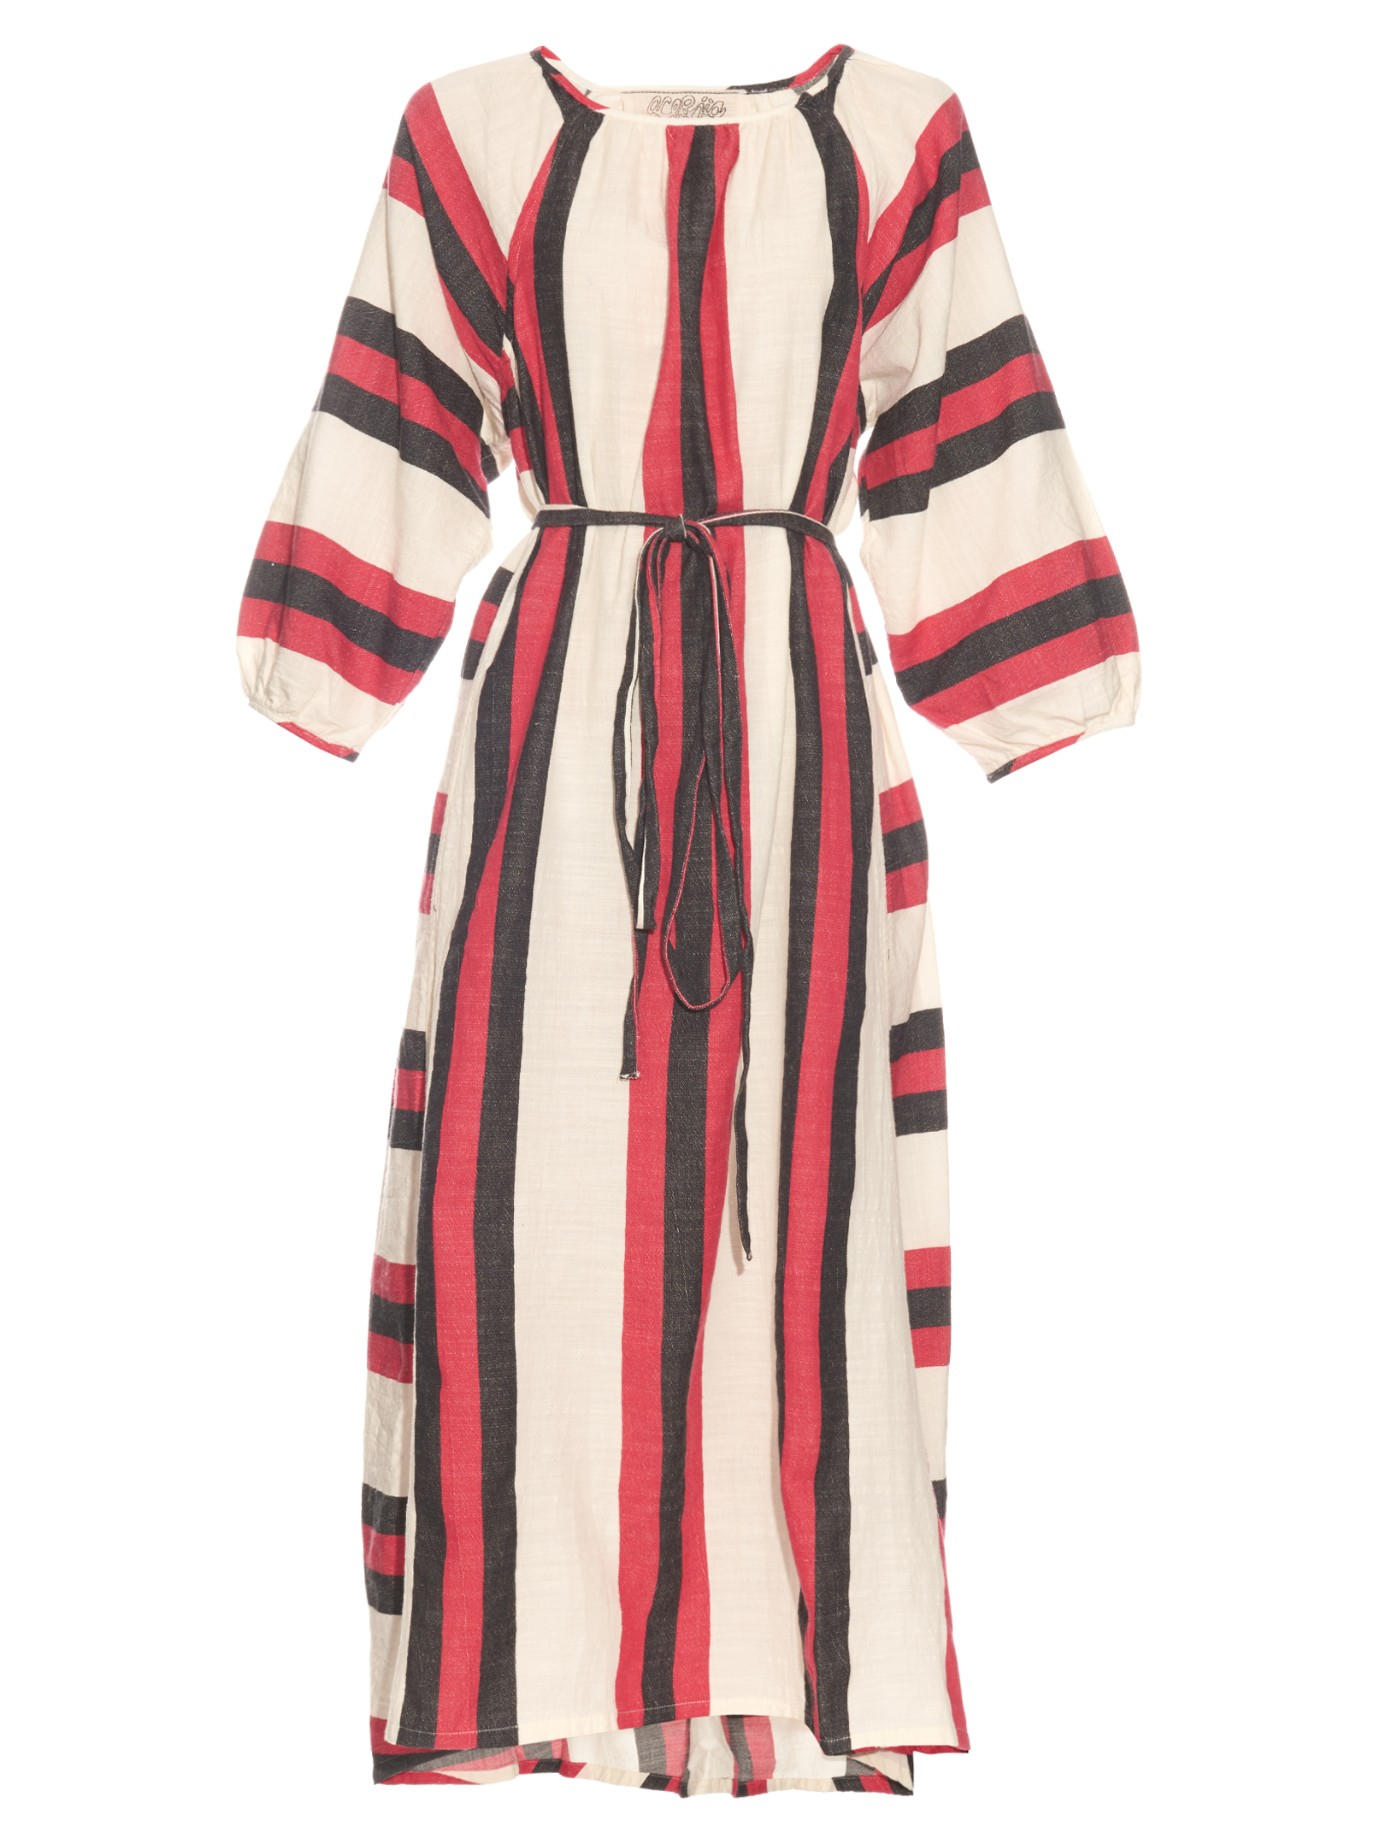 Ace & Jig Heather Striped Cotton Dress in Red White (Red) - Lyst1385 x 1846